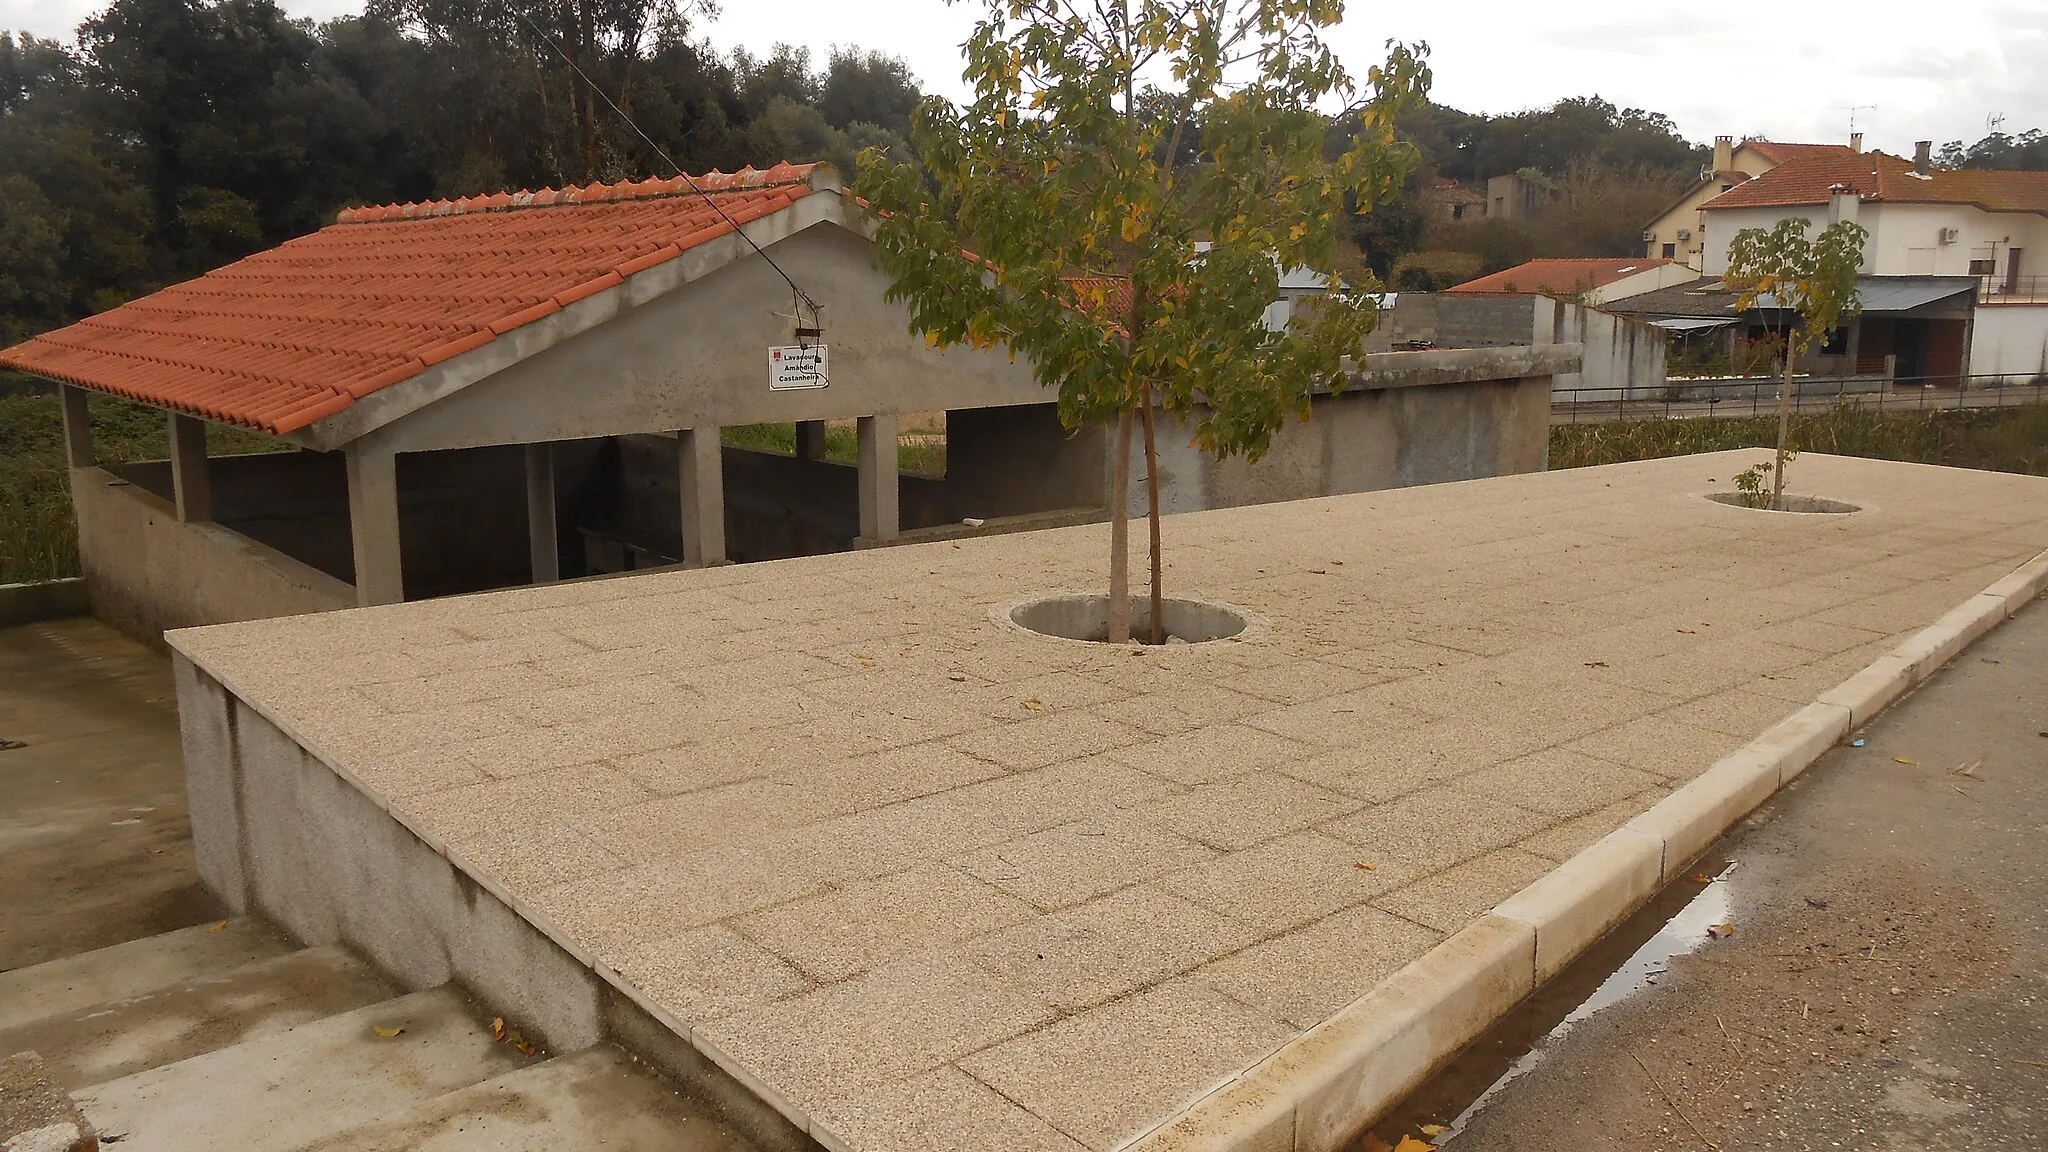 Photo showing: Public wash house in the Brunhós parish, municipality of Soure, district of Coimbra, Portugal.